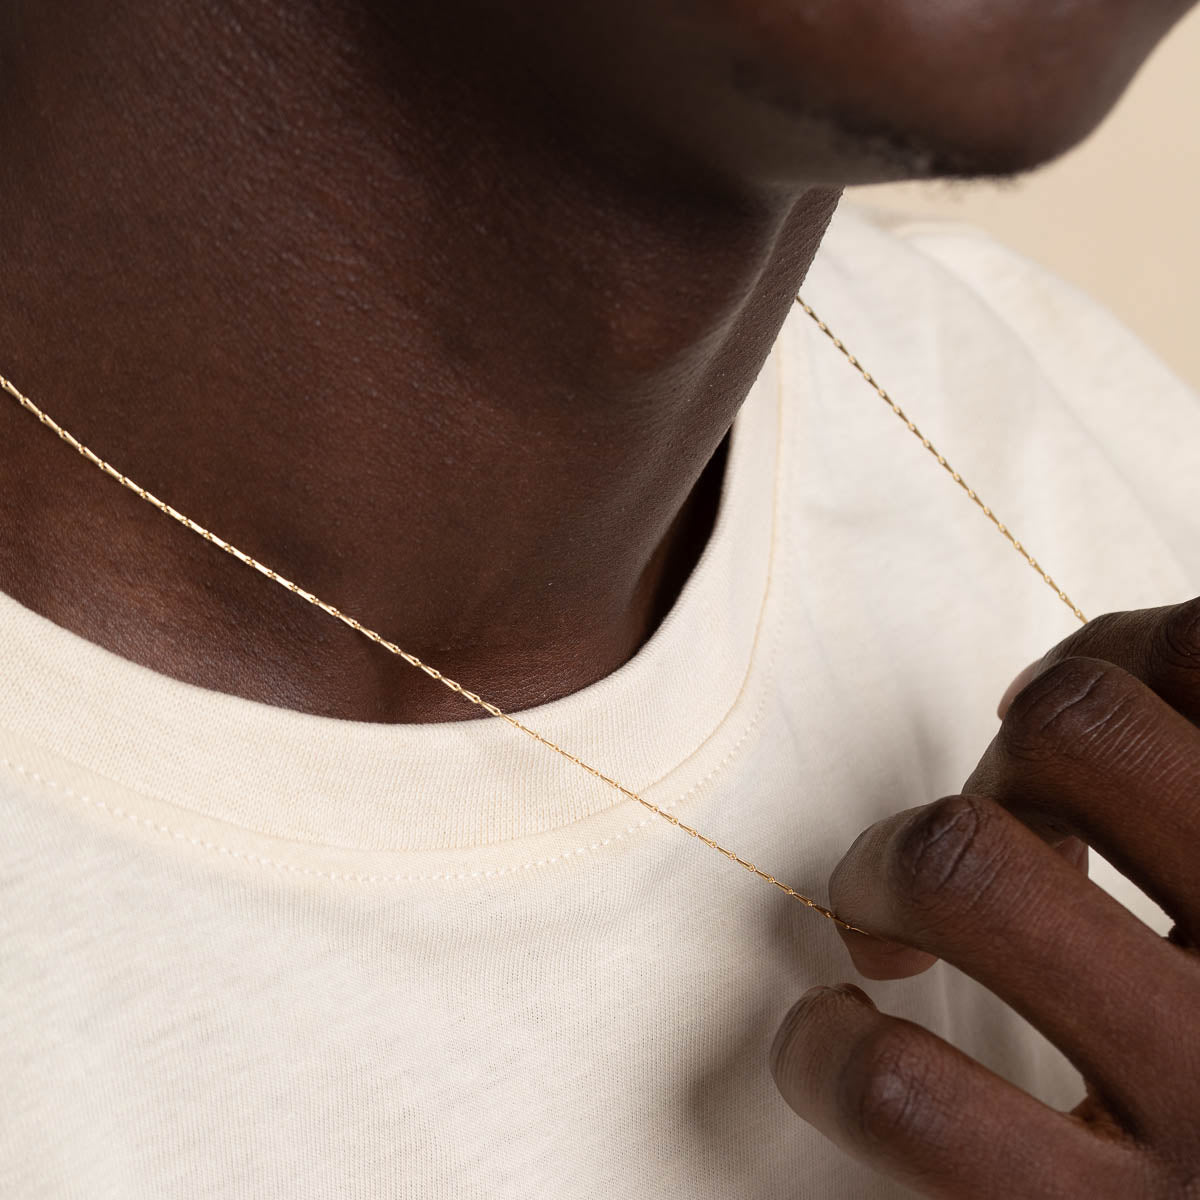 Marylebone Chain Necklace in Solid Gold